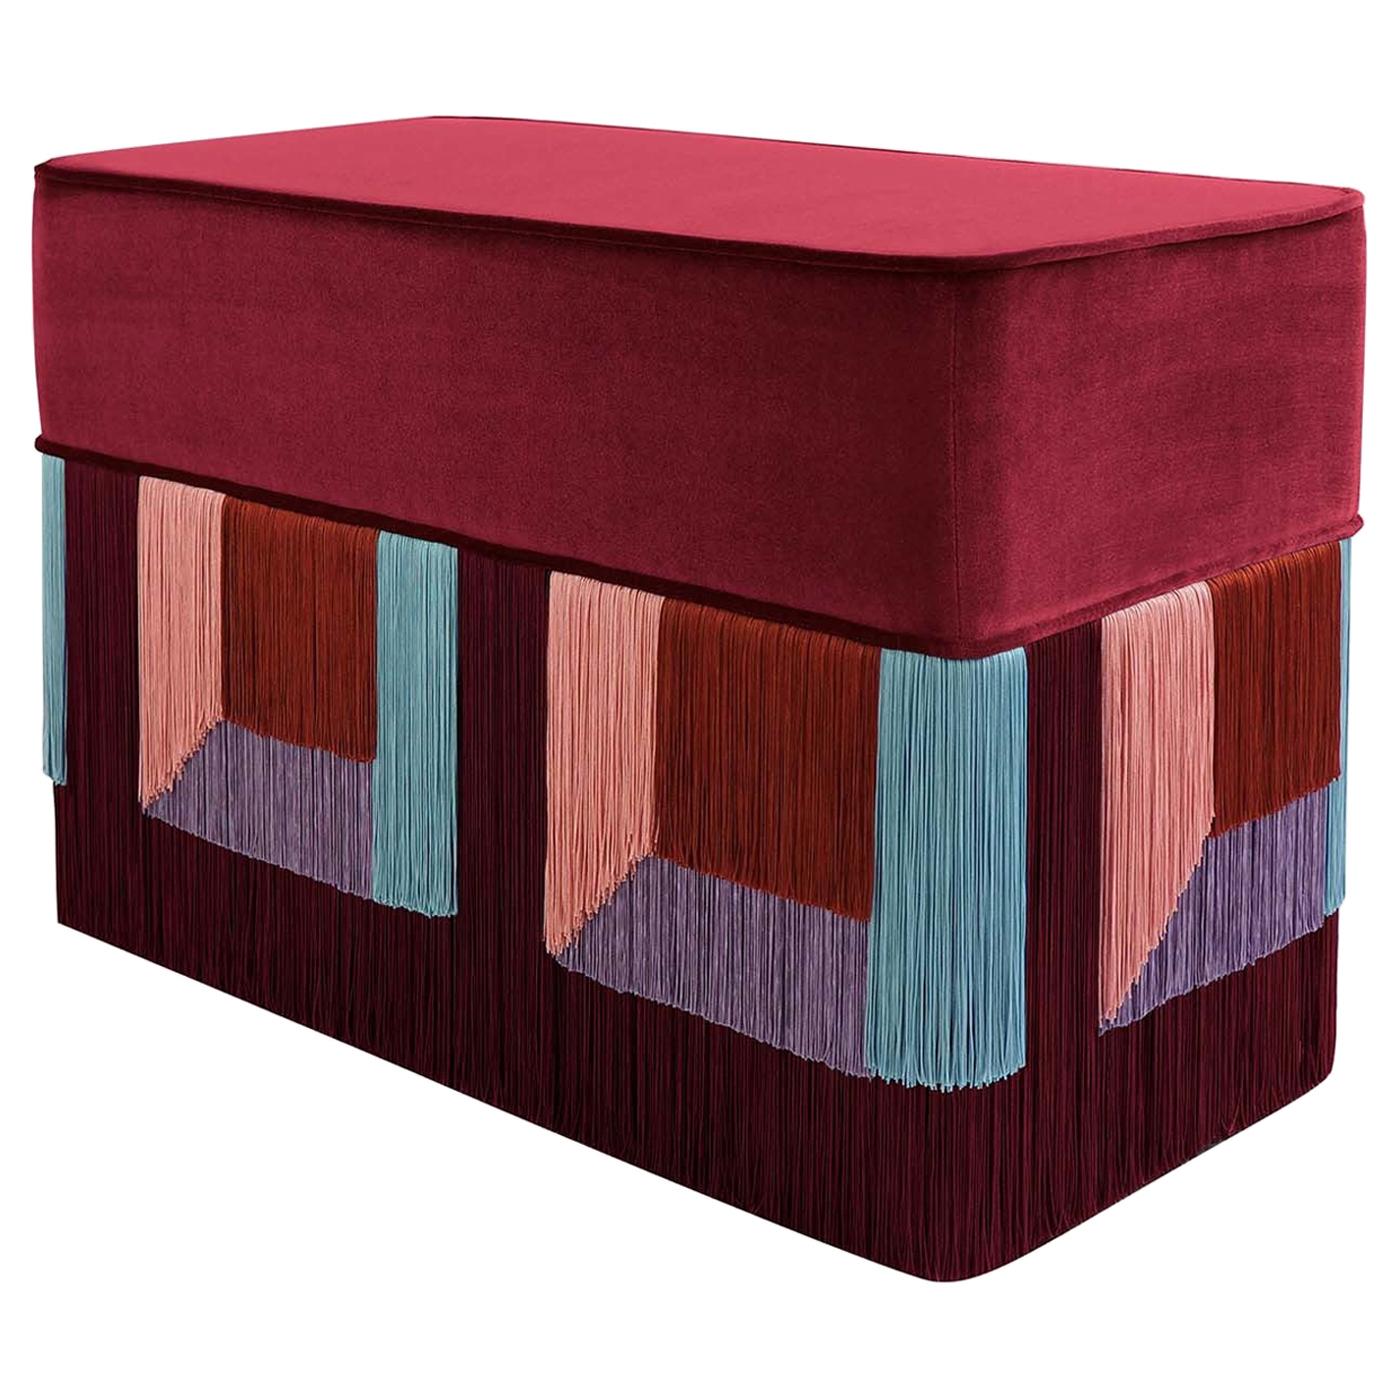 Couture Geometric Gio' Bench